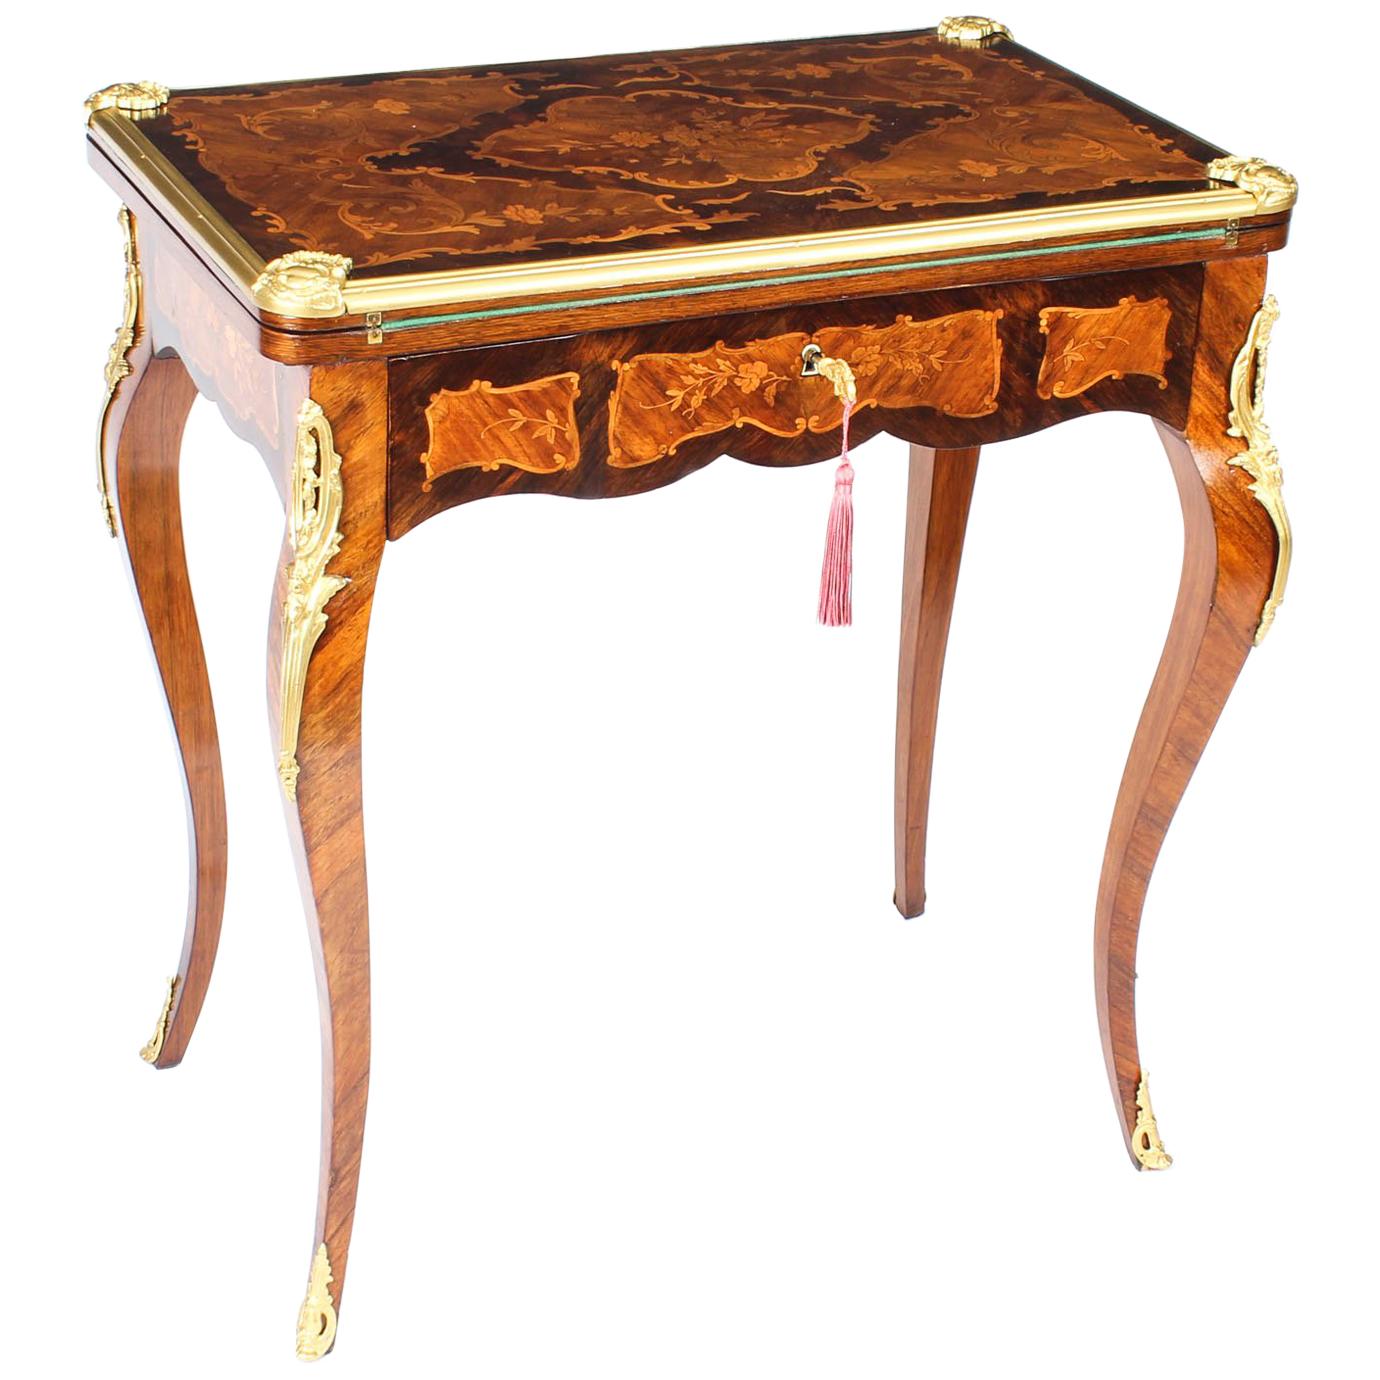 Antique French Burr Walnut Marquetry Card / Writing Table, 19th Century